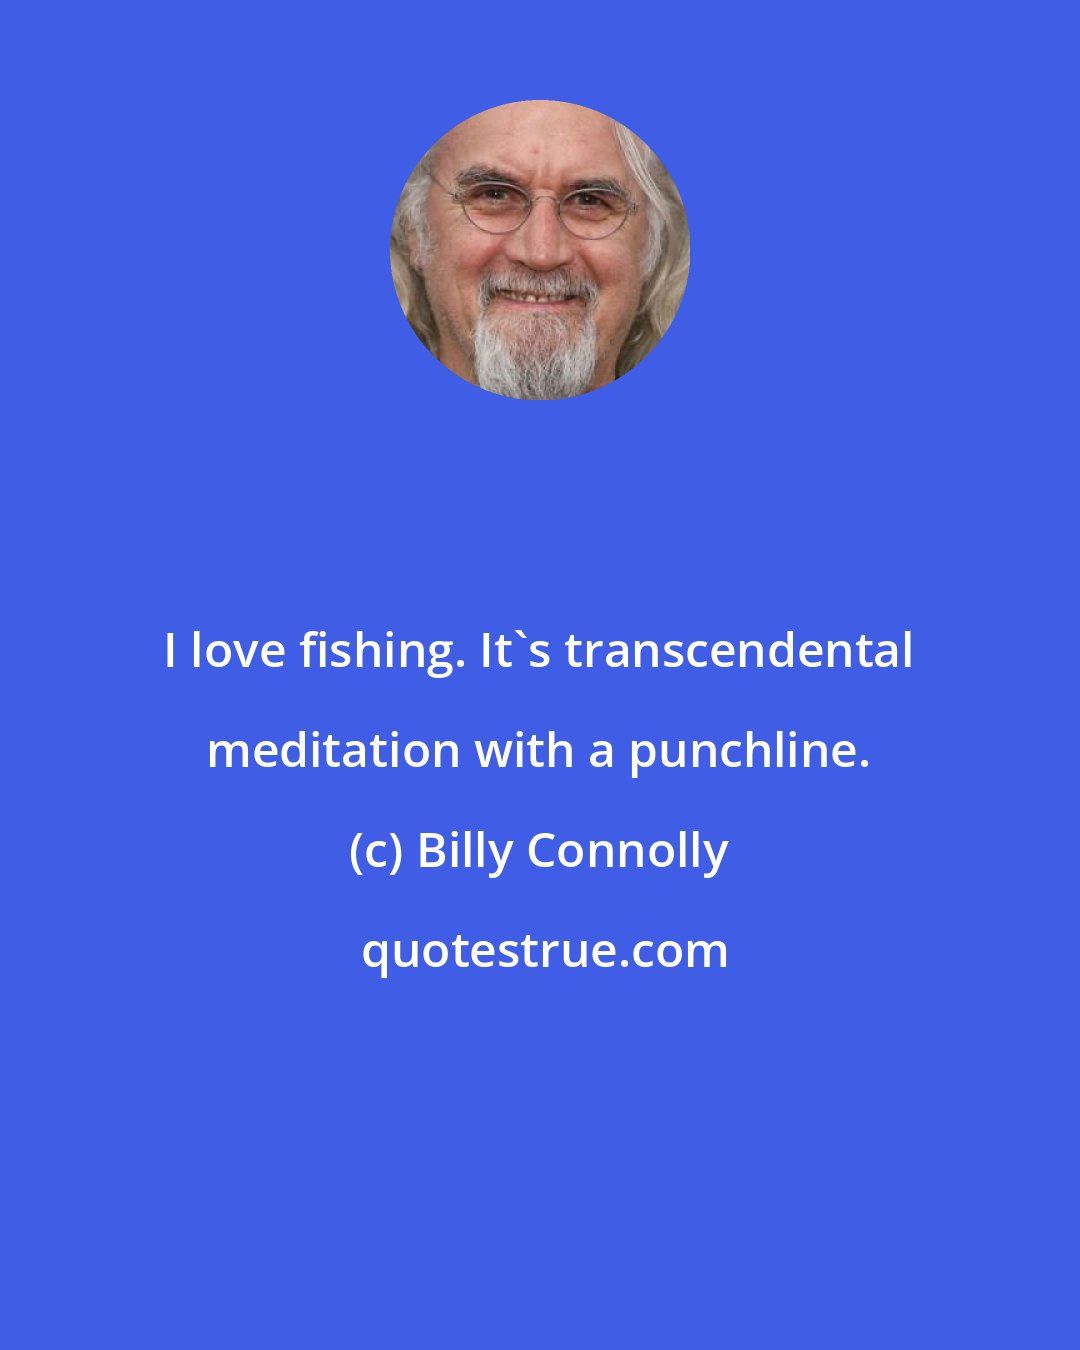 Billy Connolly: I love fishing. It's transcendental meditation with a punchline.